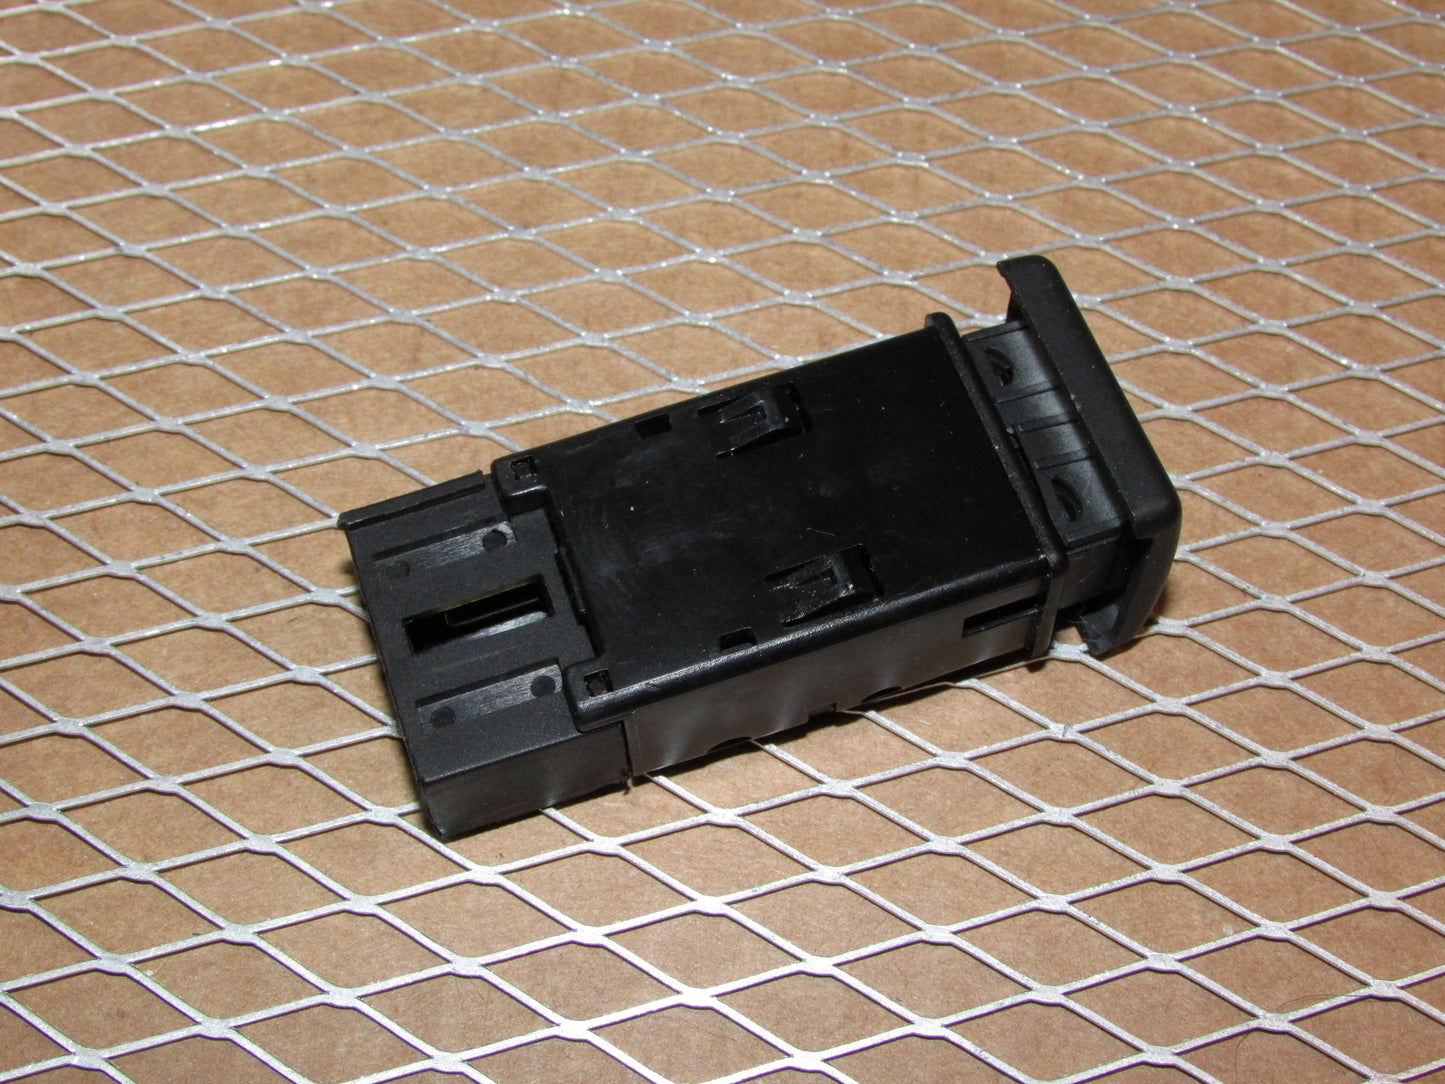 03 04 Land Rover Discovery 2 OEM Rear Defroster Switch